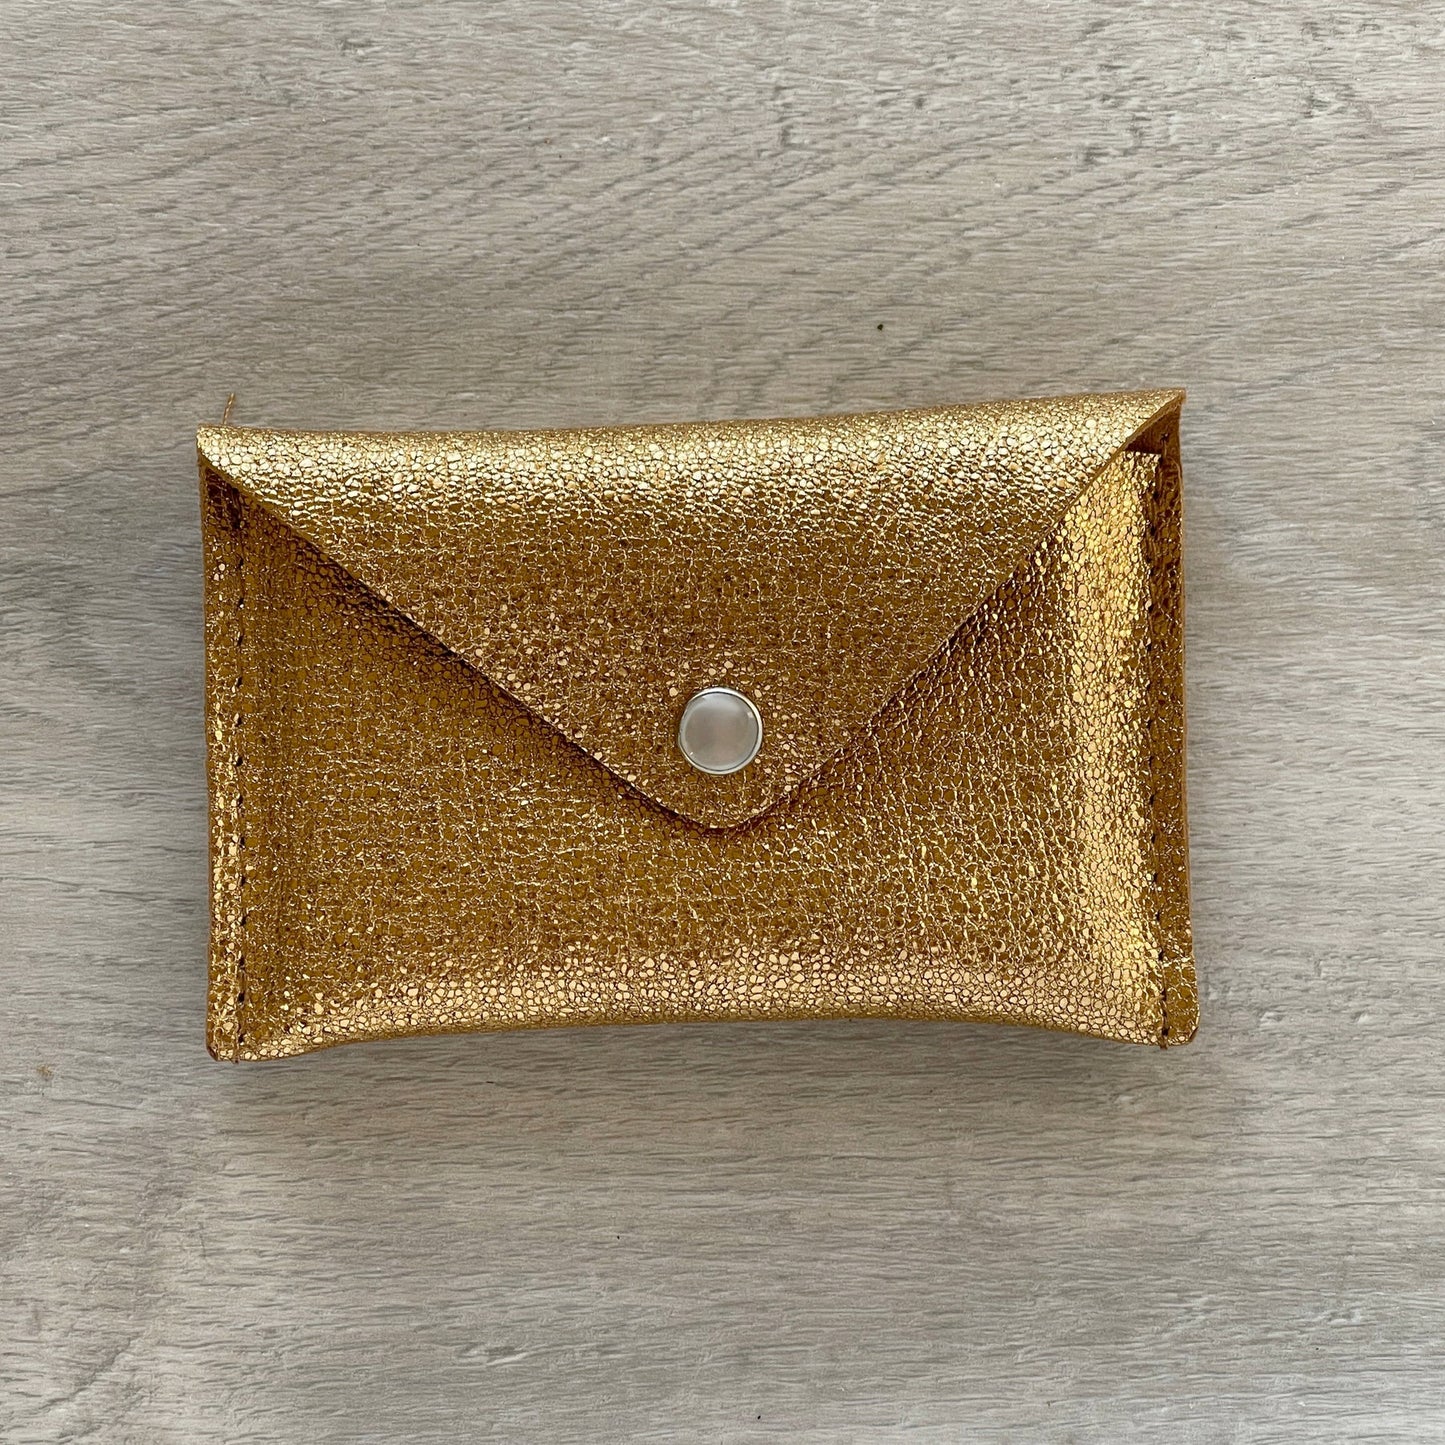 Card Wallet in Reclaimed Leather -- Choose Your Color